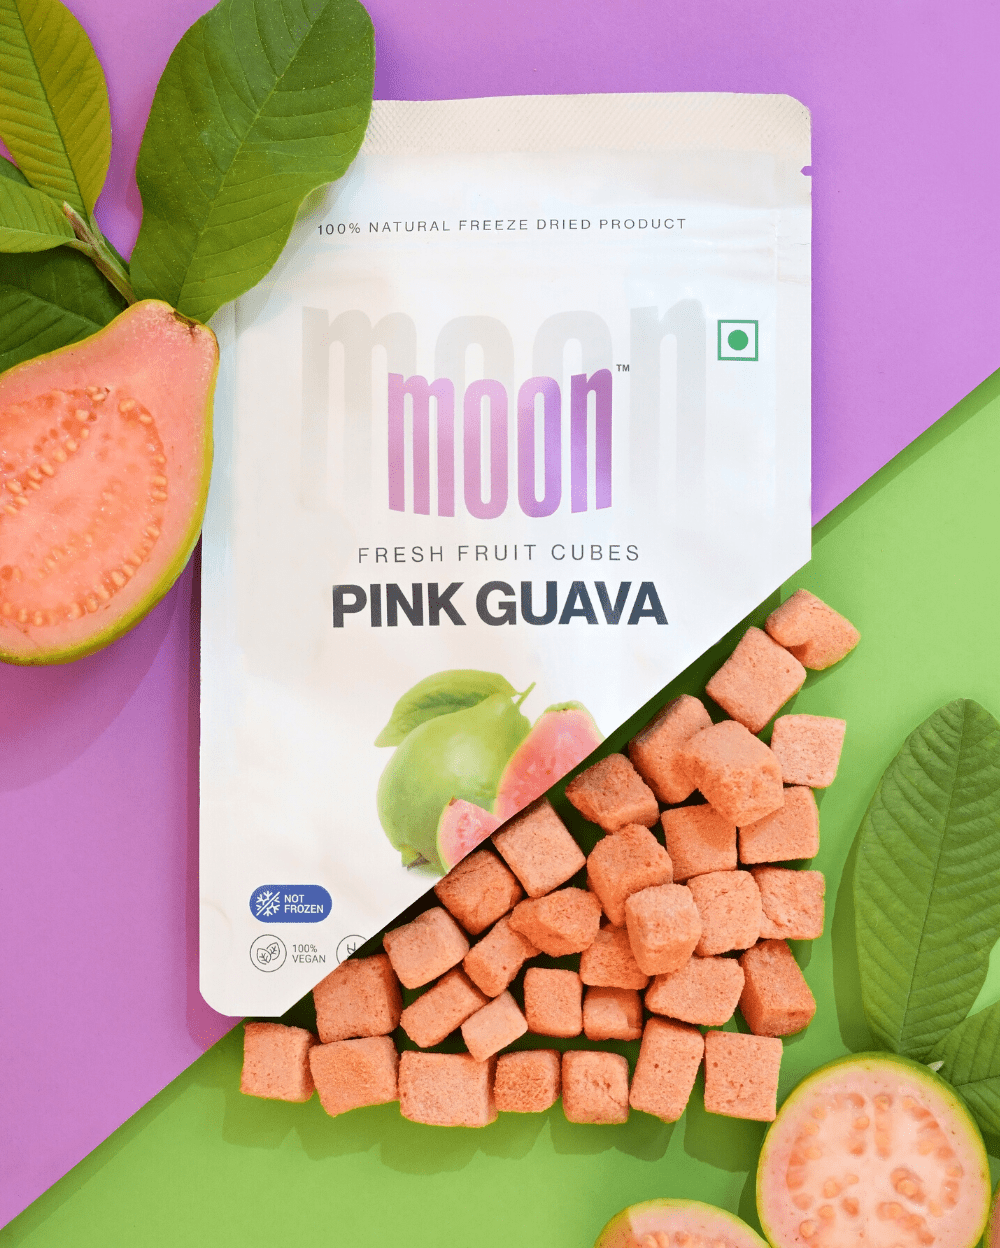 A bag of Moon Freeze Dried Pink Guava cubes on a colorful background by Themoonstoreindia.